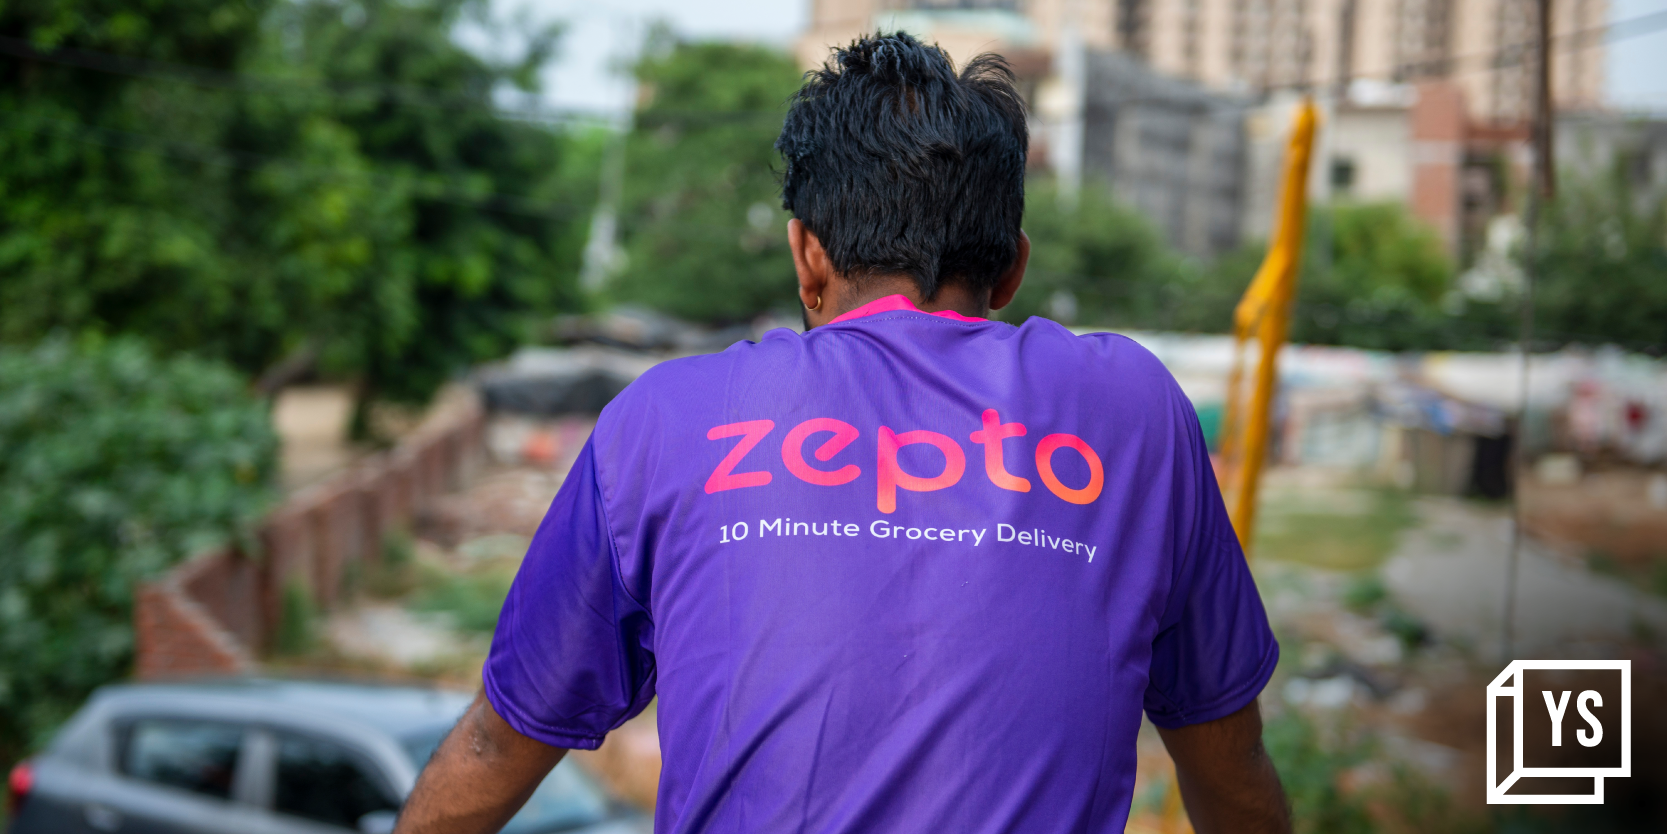 Zepto rolls out loyalty programme Zepto Pass for free deliveries and discounts